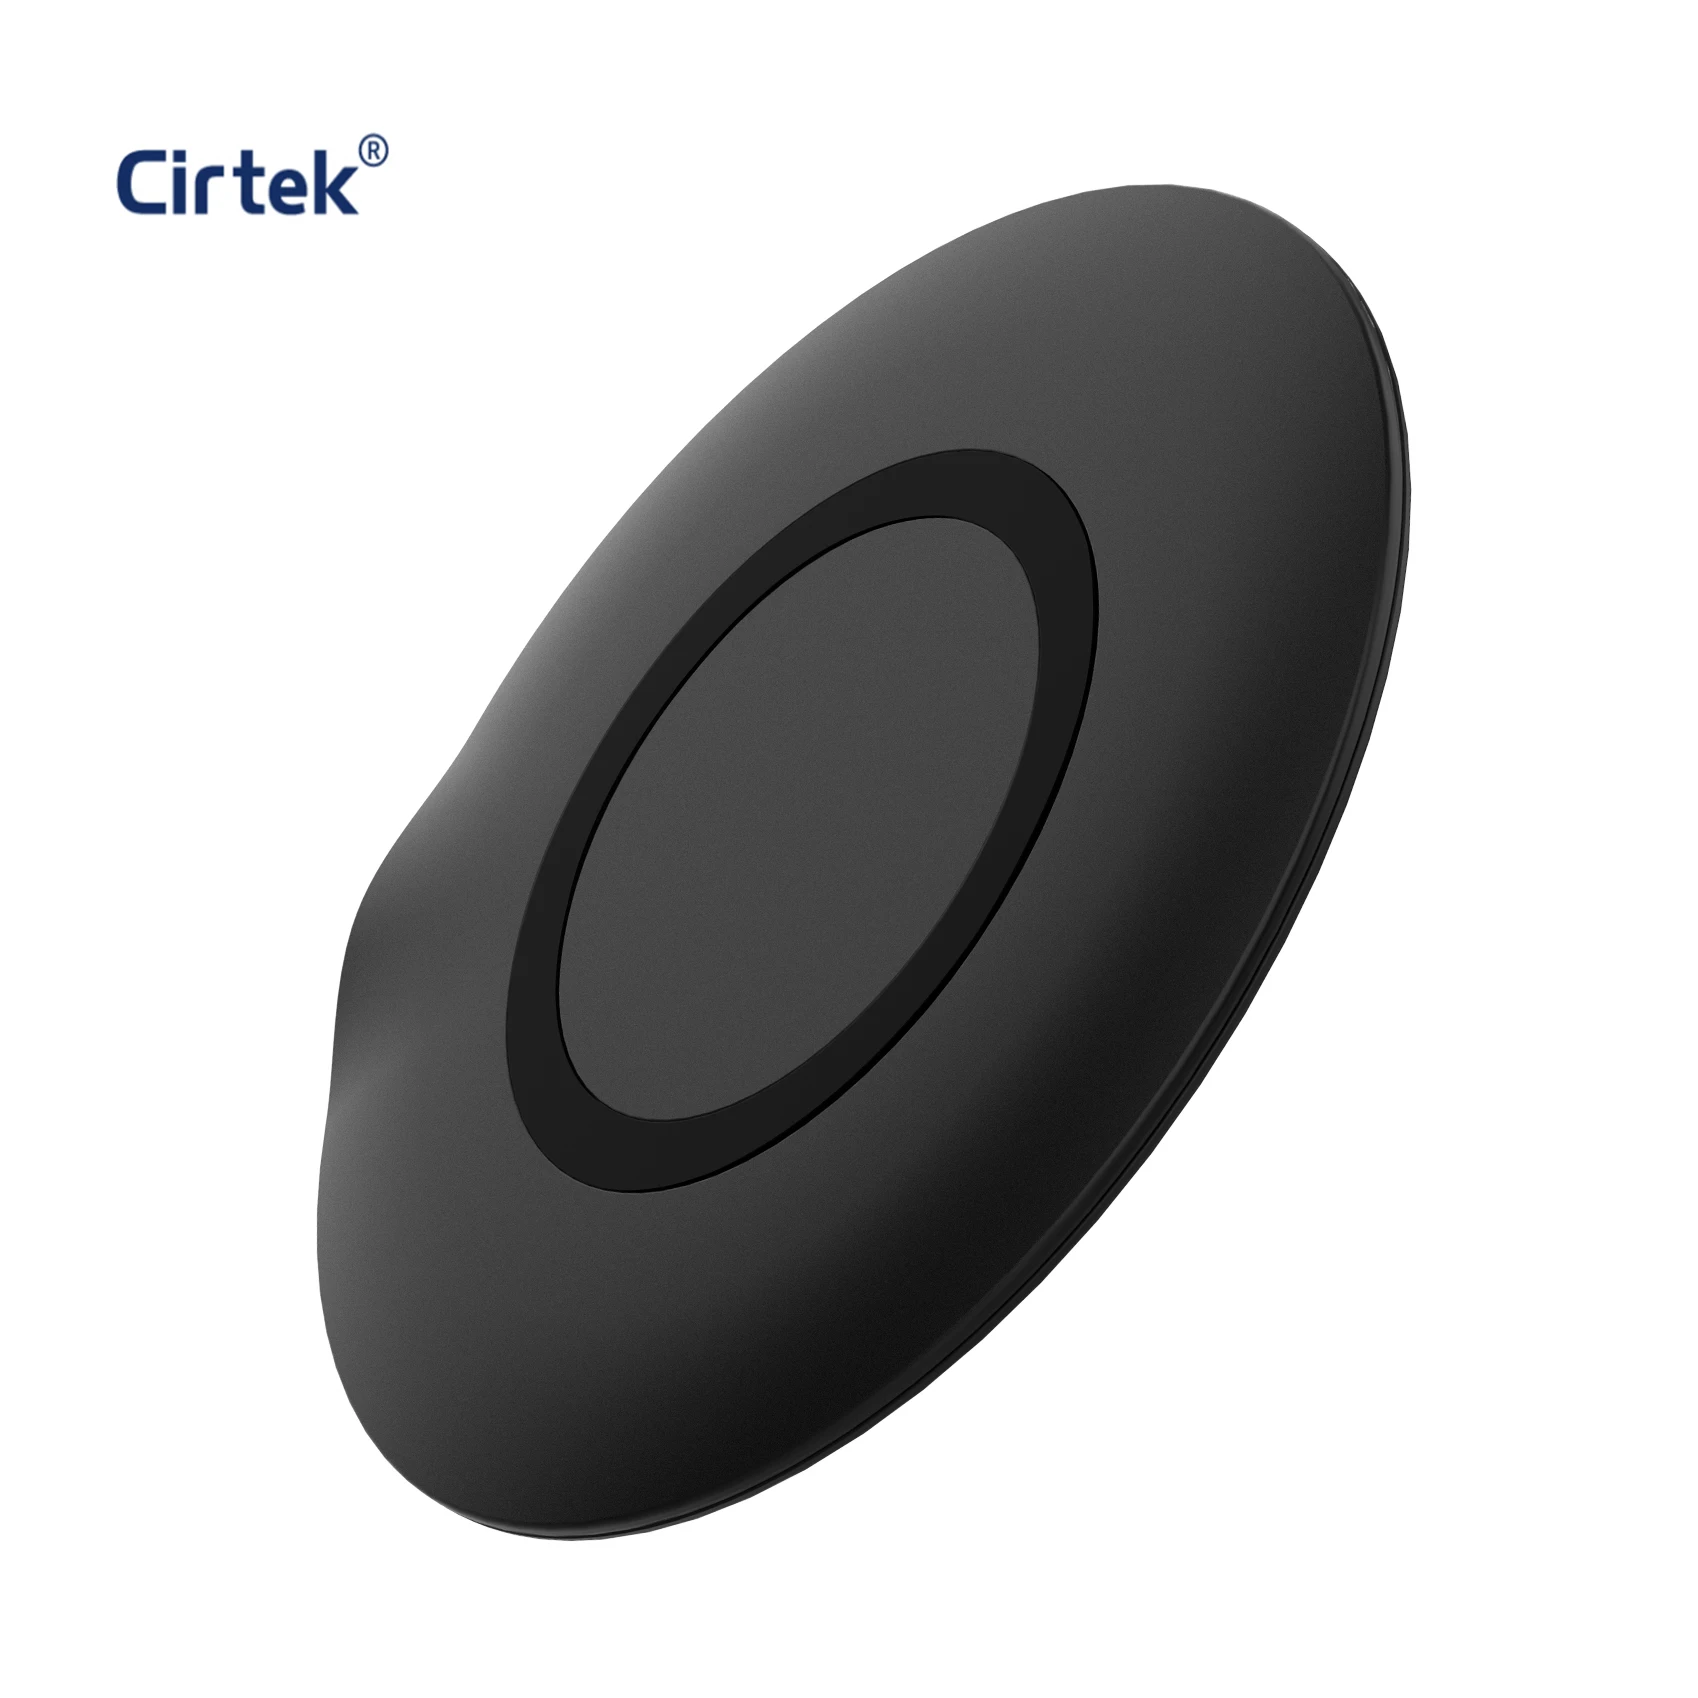 

Cirtek 15w good quality mobile invisible wireless charger CE Rohs FCC QI charging station for multiple devices rapid charger, Black